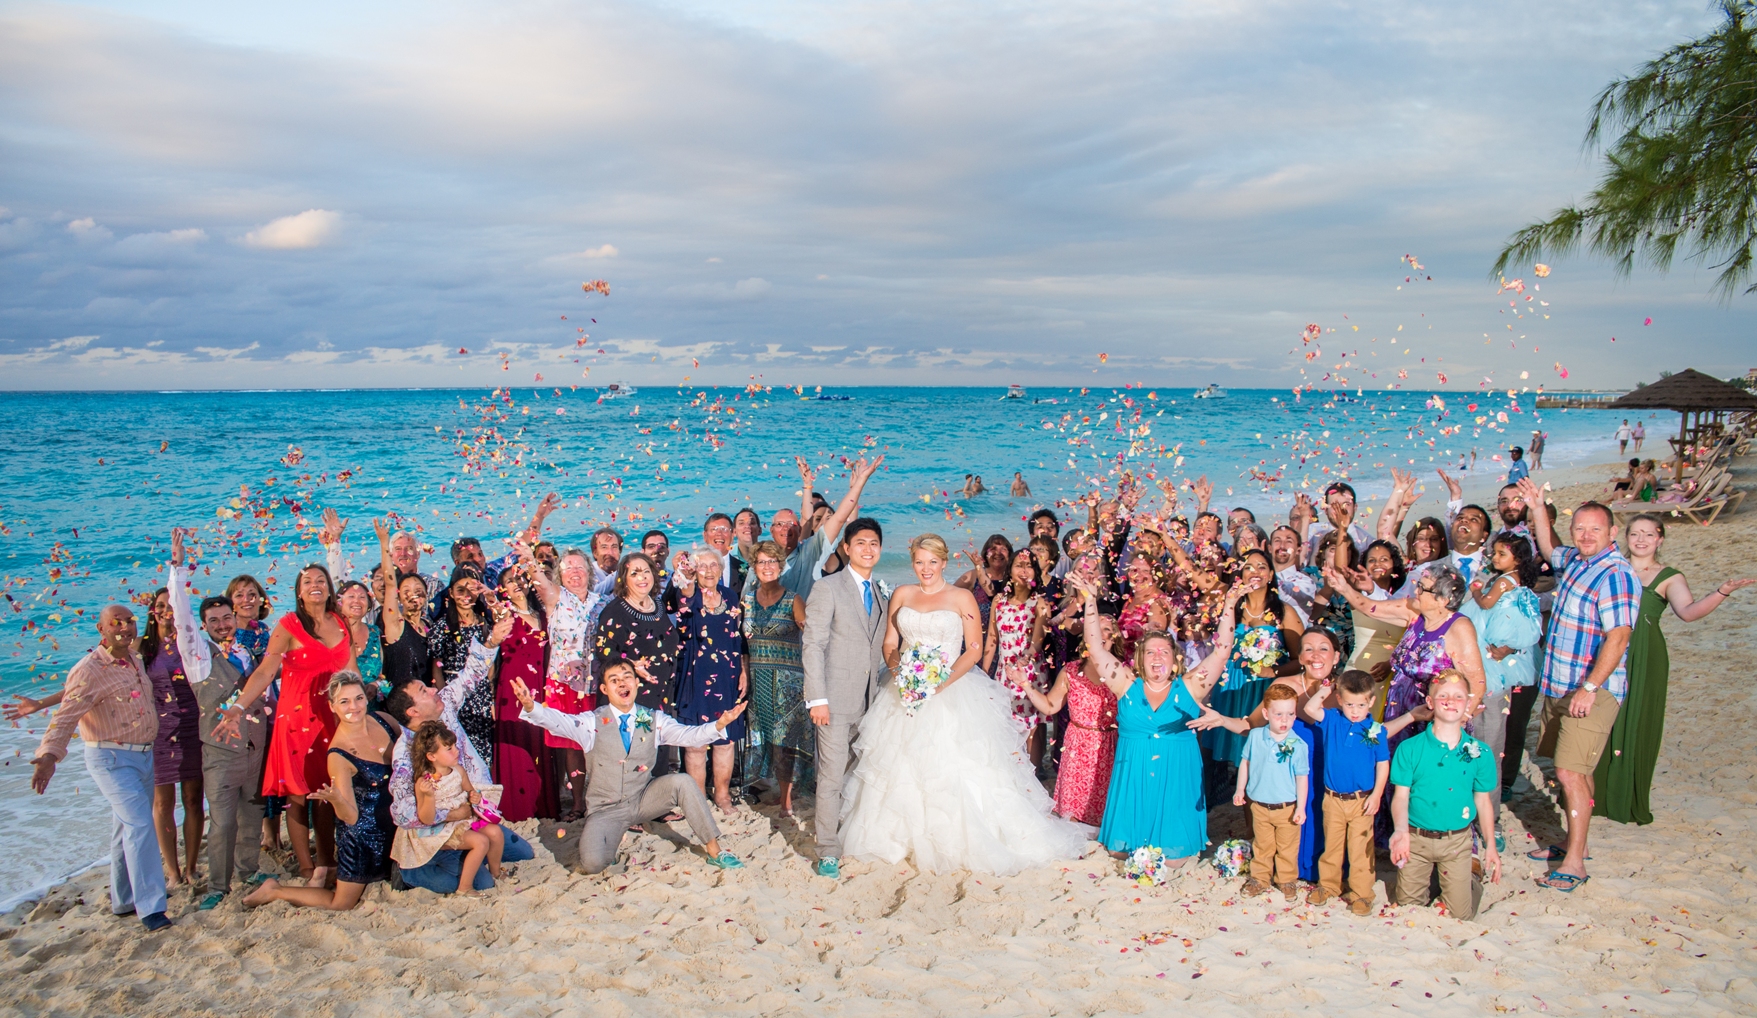 wedding-rose-petal-toss.-zak-and-claire-married-november-12.-2016-at-beaches-resort-in-the-turks-and-caicos-with-flyboy-naturals-rose-petals..2-small-file.442-clairezak-03638.jpg